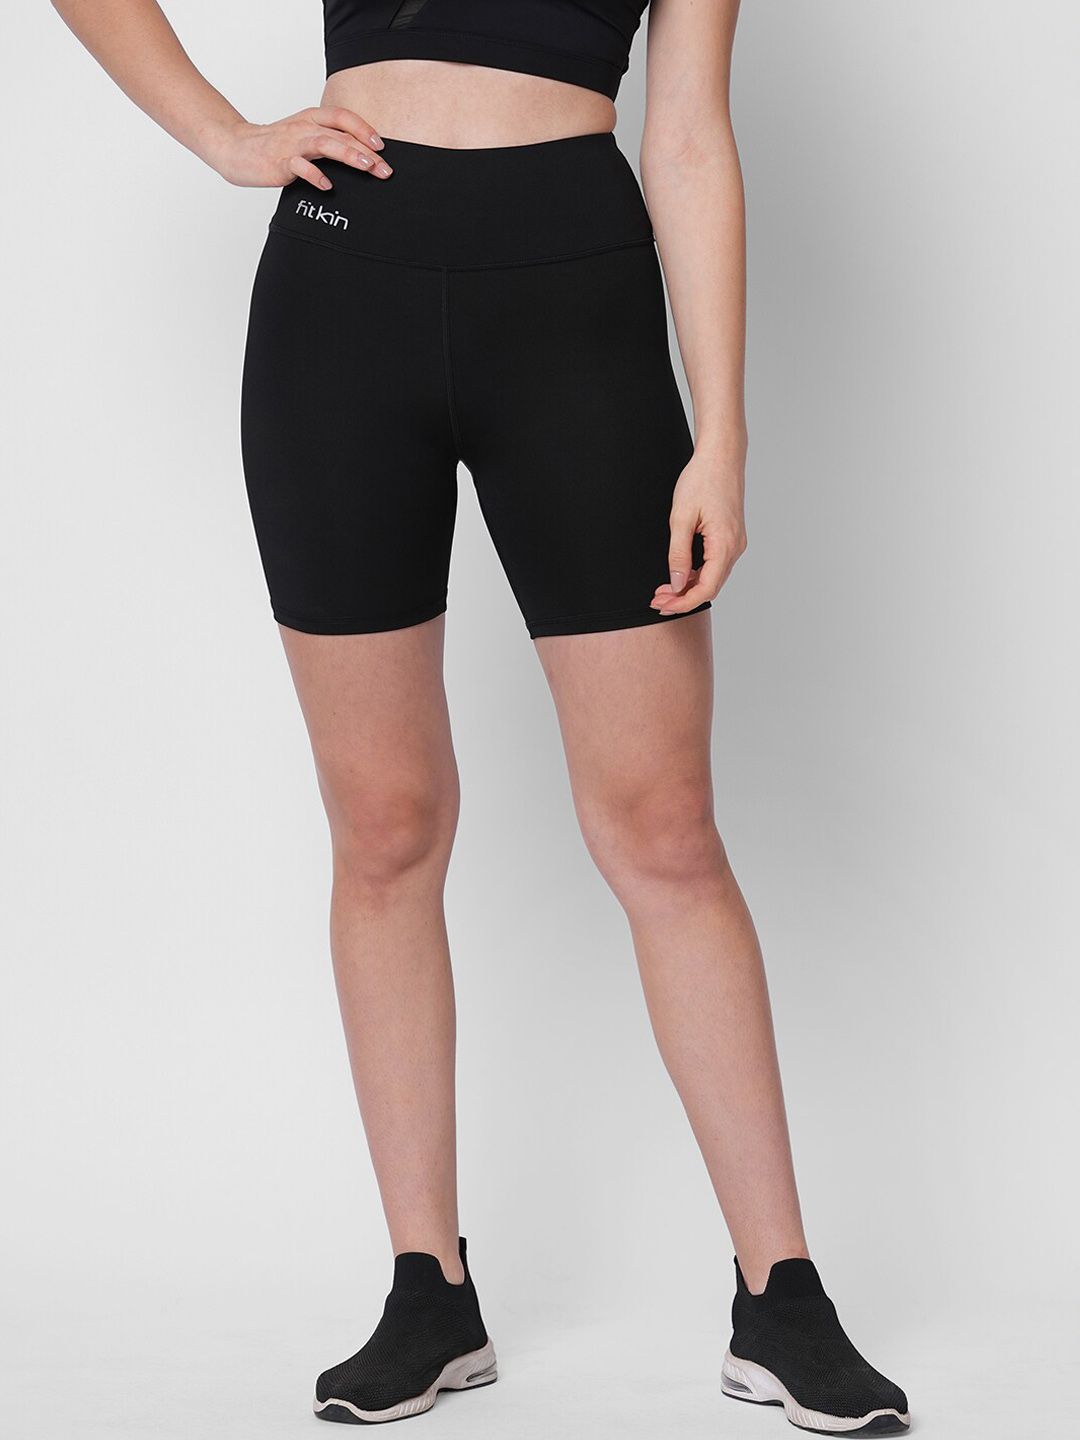 Fitkin Women Black High-Rise Training or Gym Sports Shorts Price in India